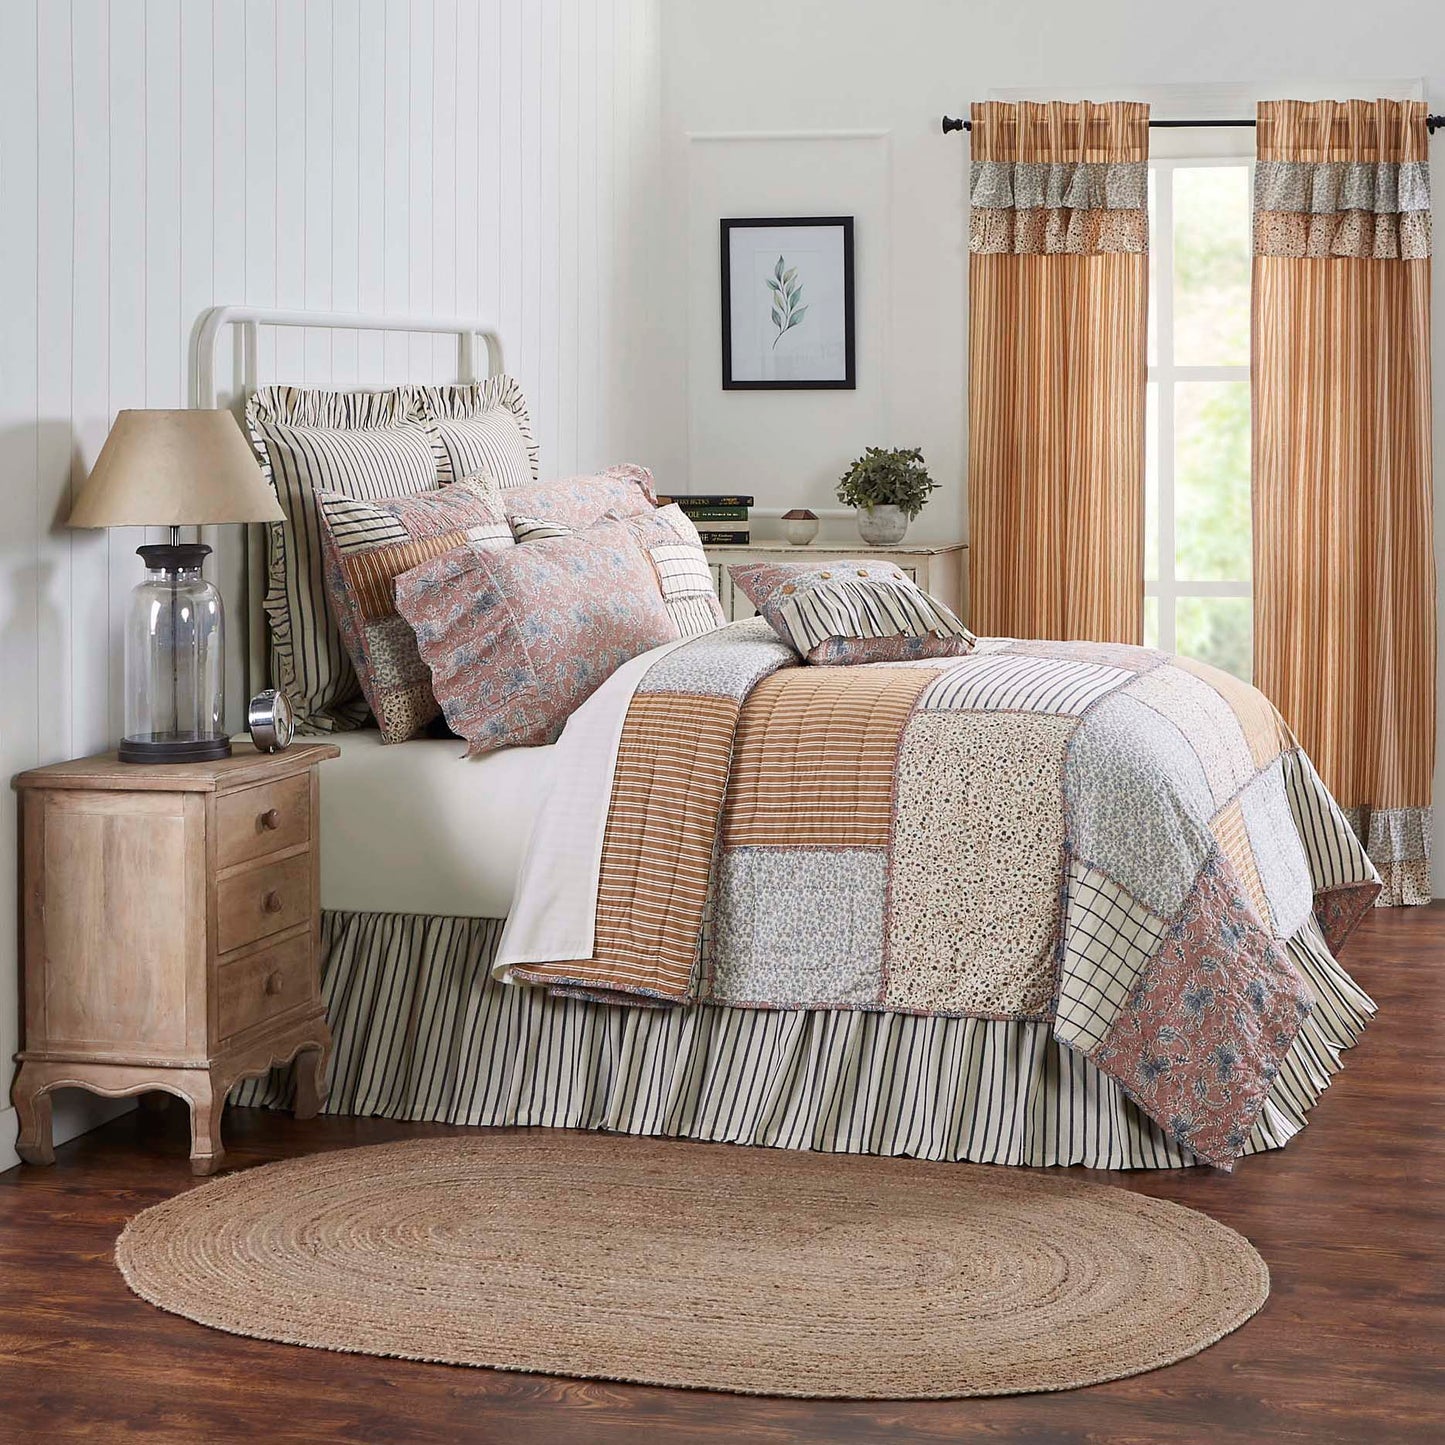 70127-Kaila-Luxury-King-Quilt-120Wx105L-image-1